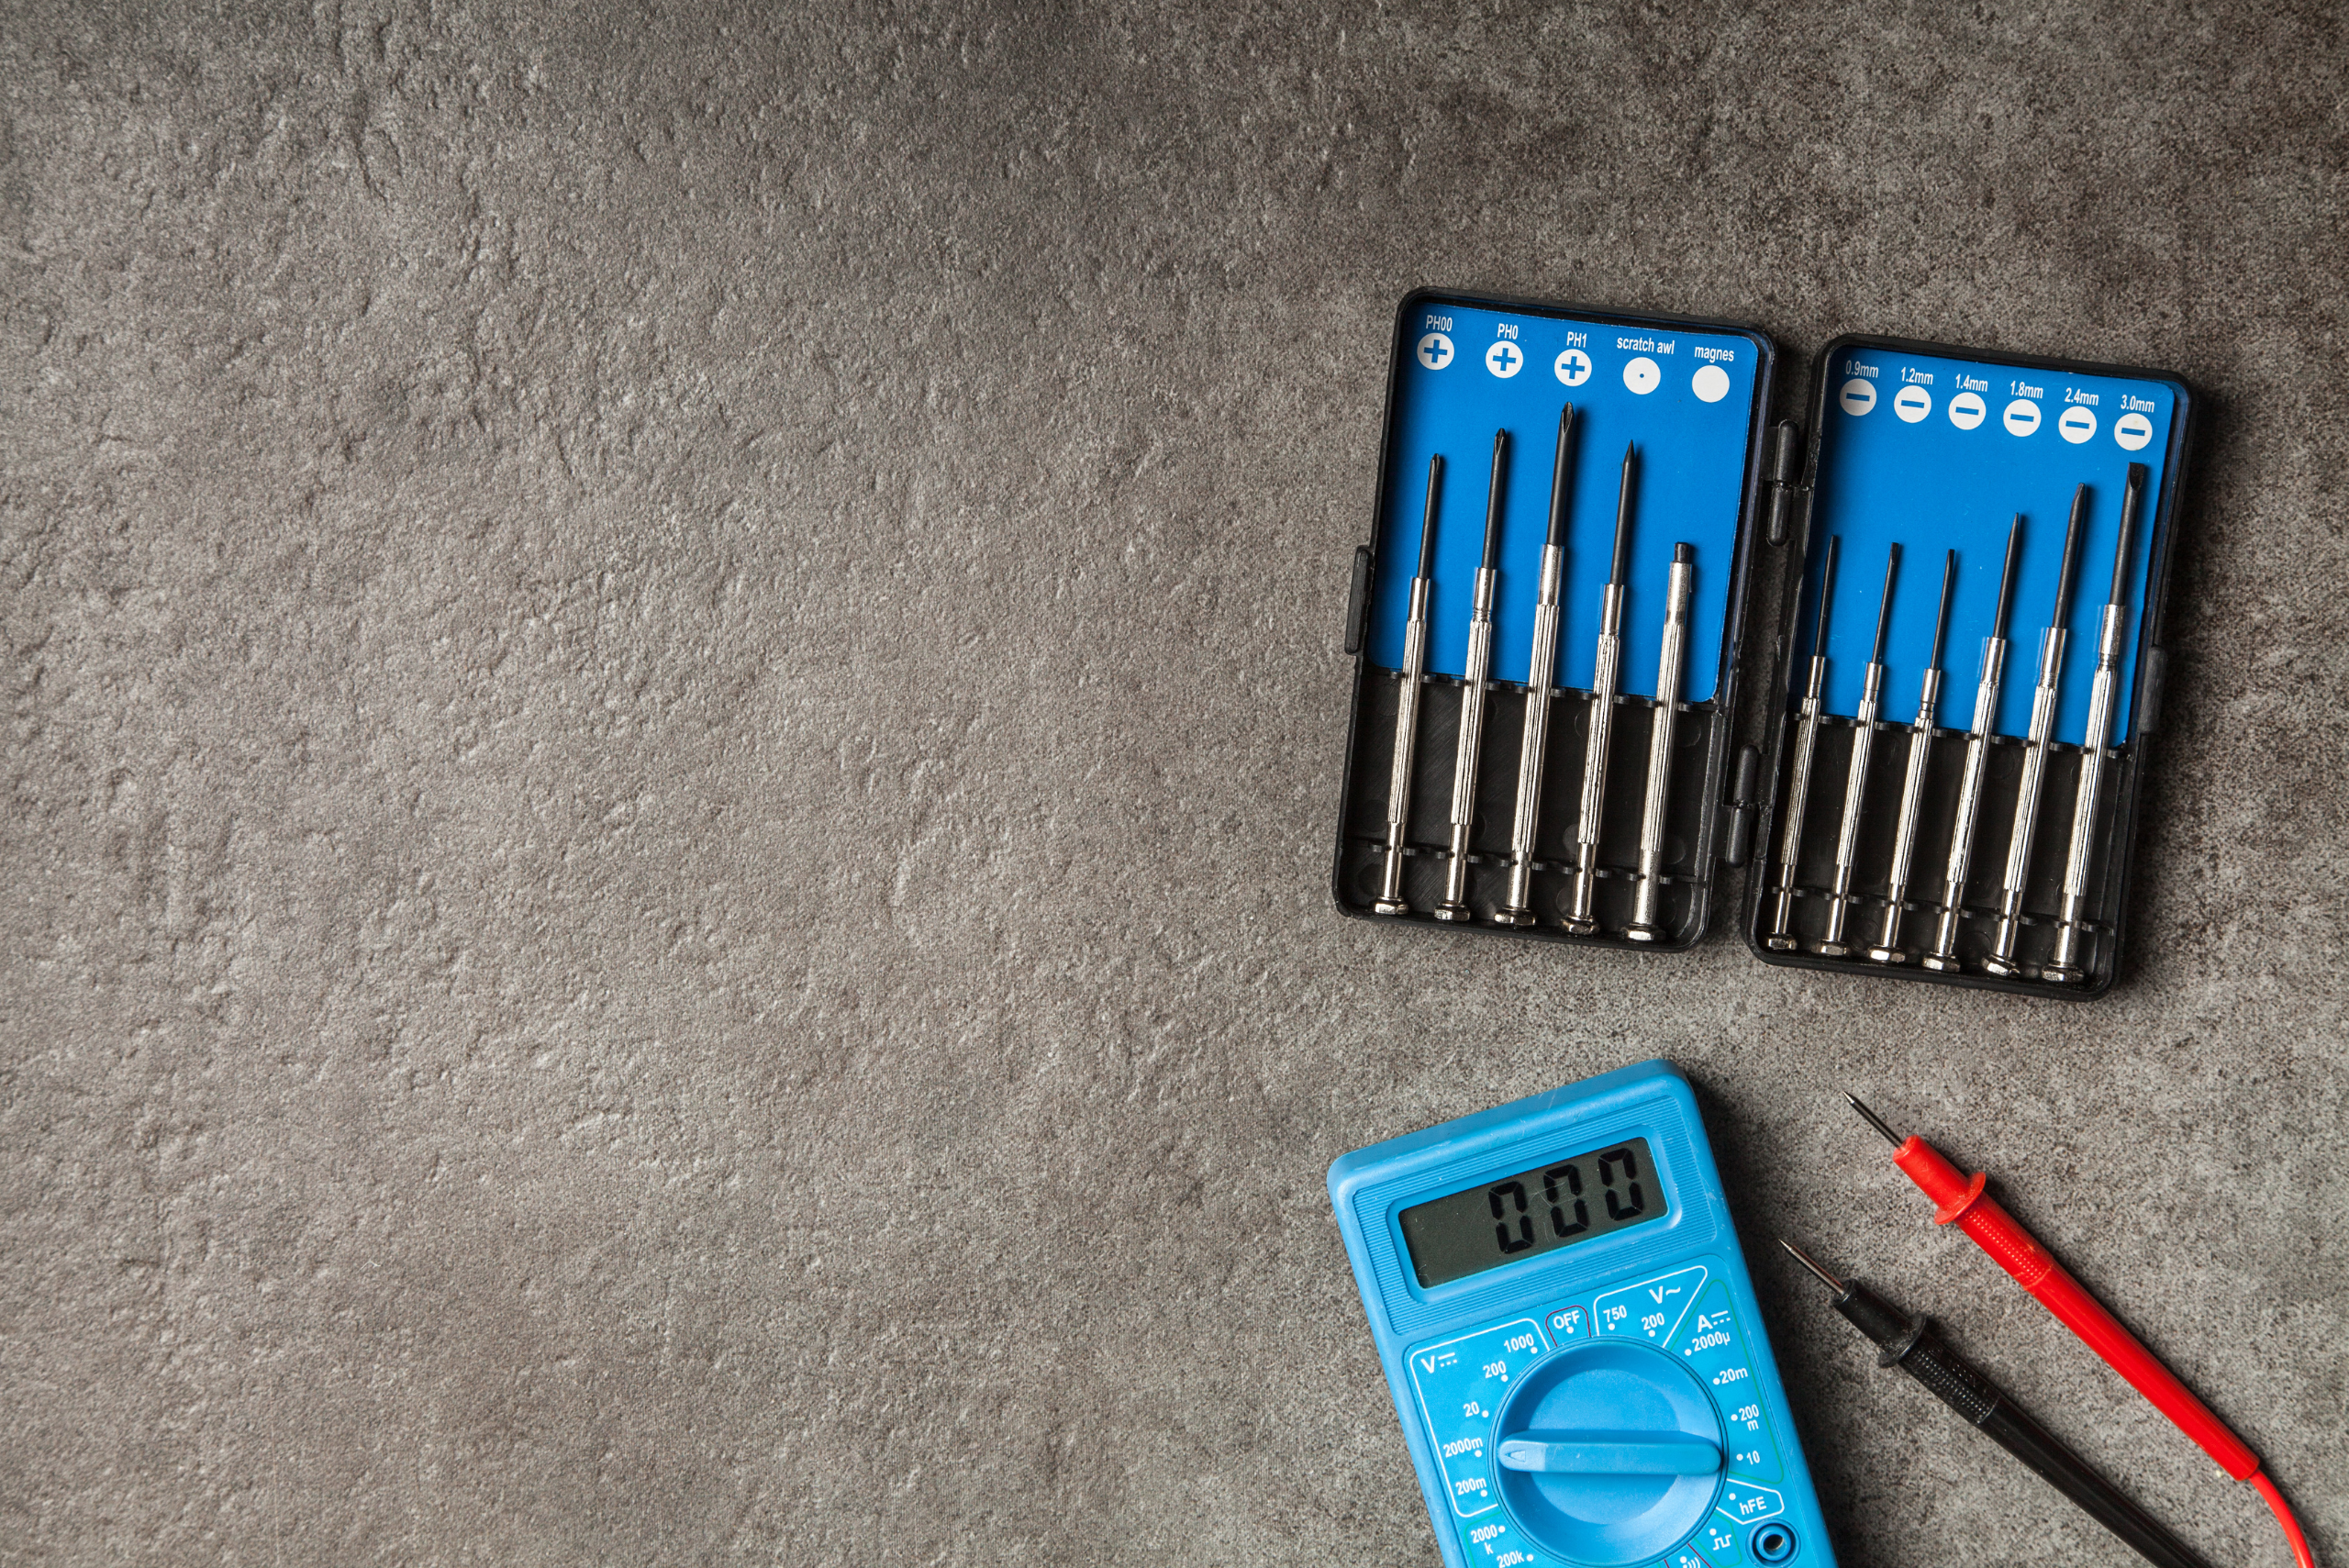 A blue multimeter voltage tester and precision screw drivers.